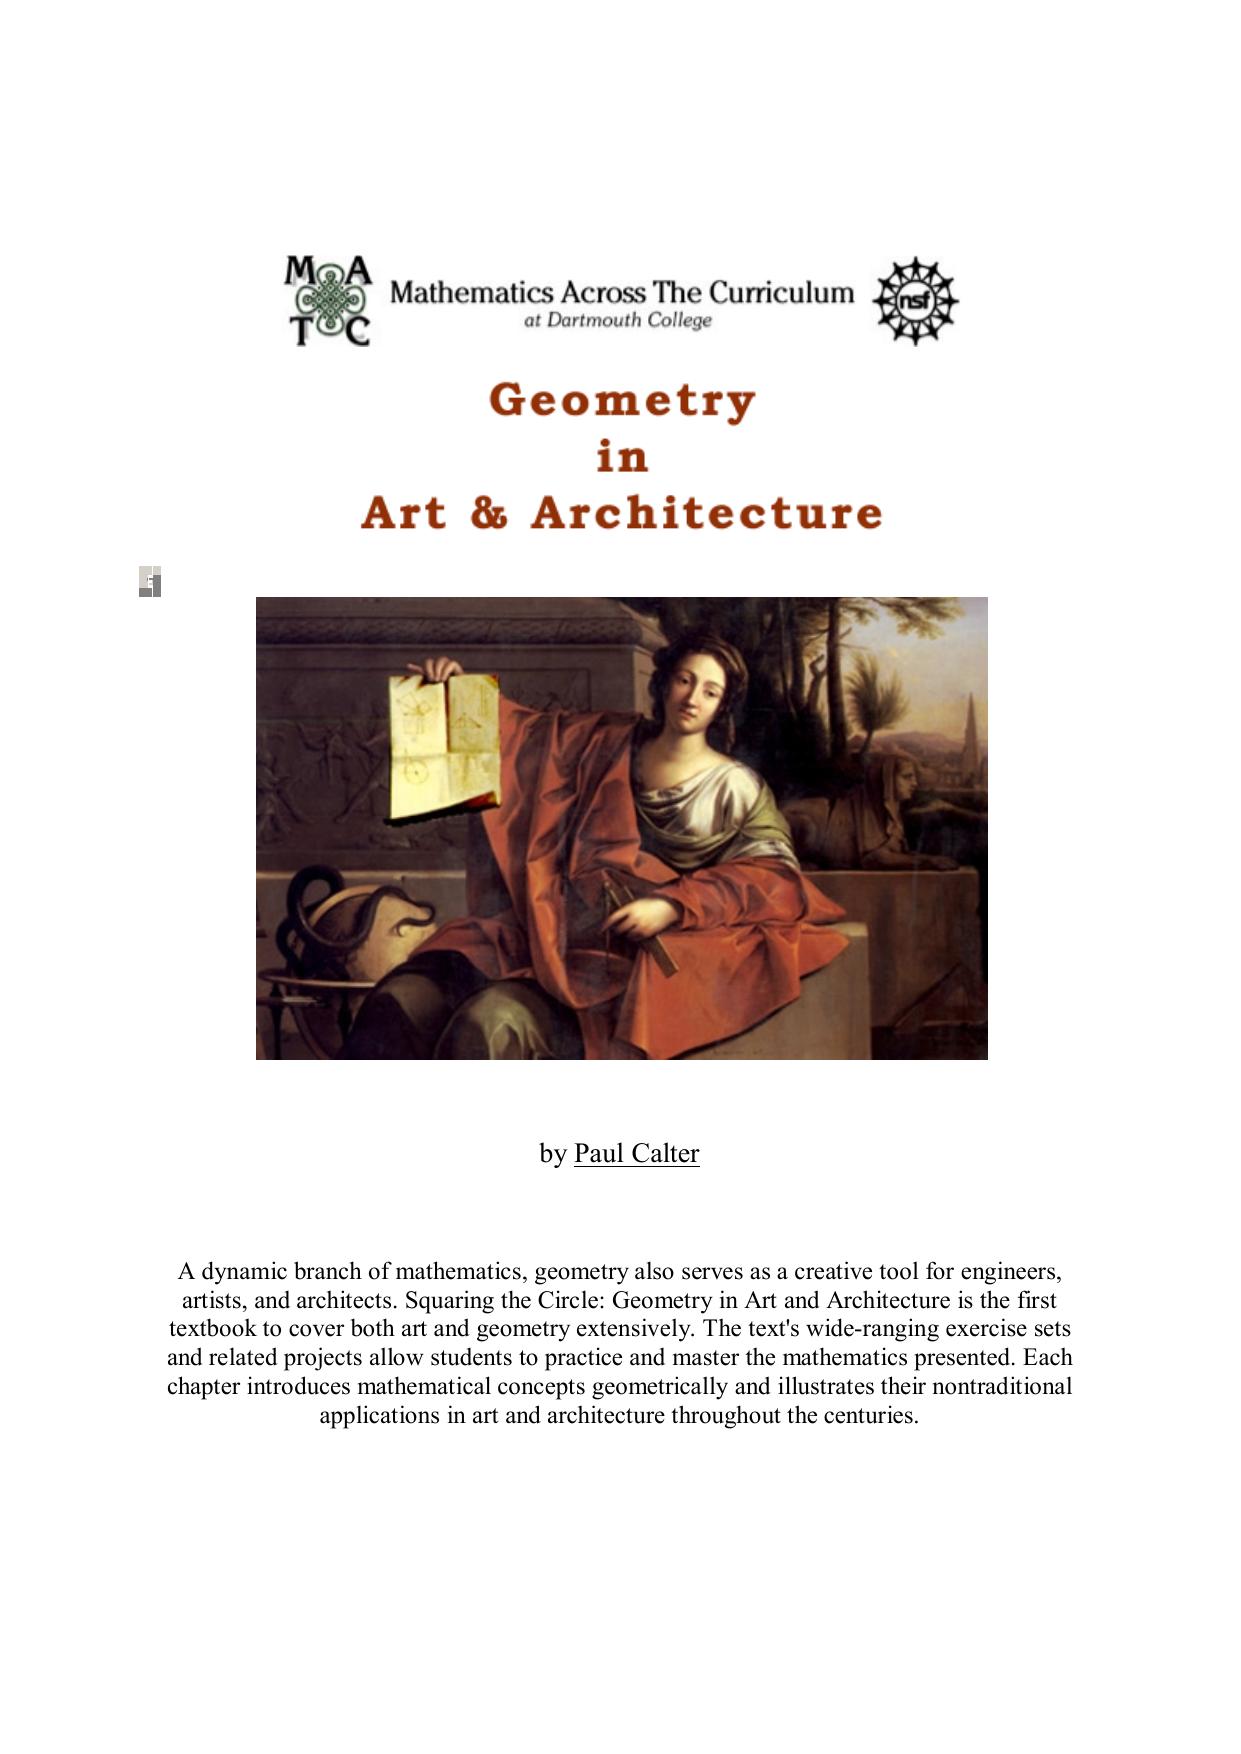 Geometry in Art and Architecture